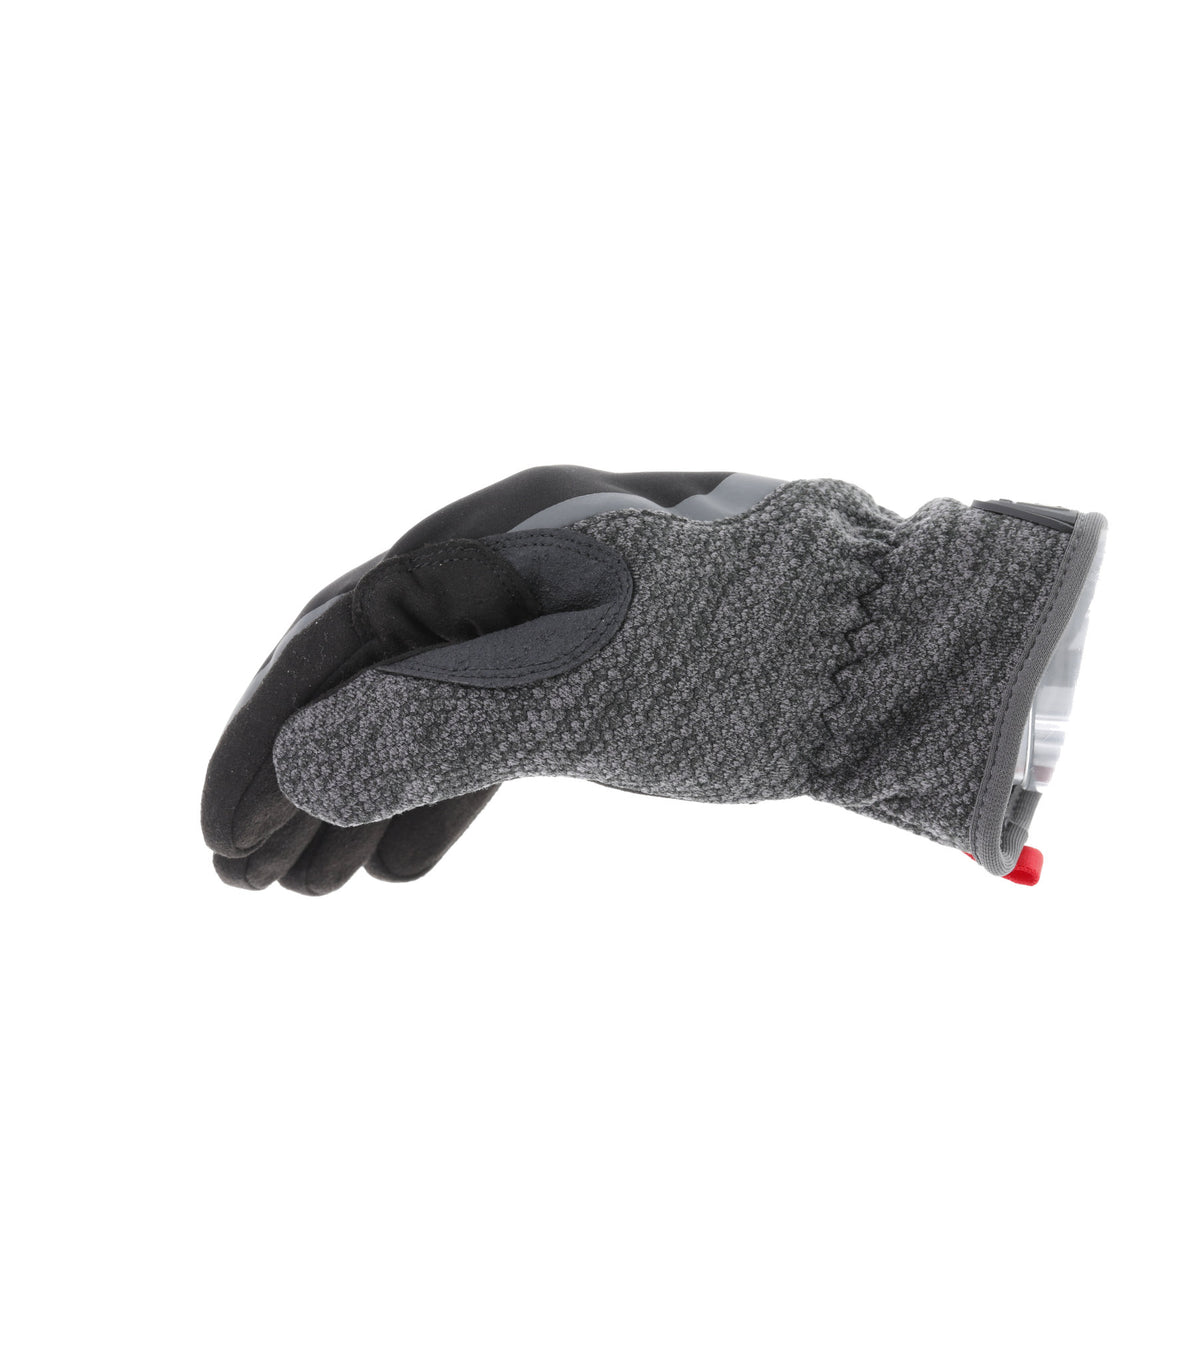 Side view of Mechanix Wear ColdWork FastFit gloves, showcasing the fleece-lined SoftShell exterior and ergonomic fit for cold weather tasks.